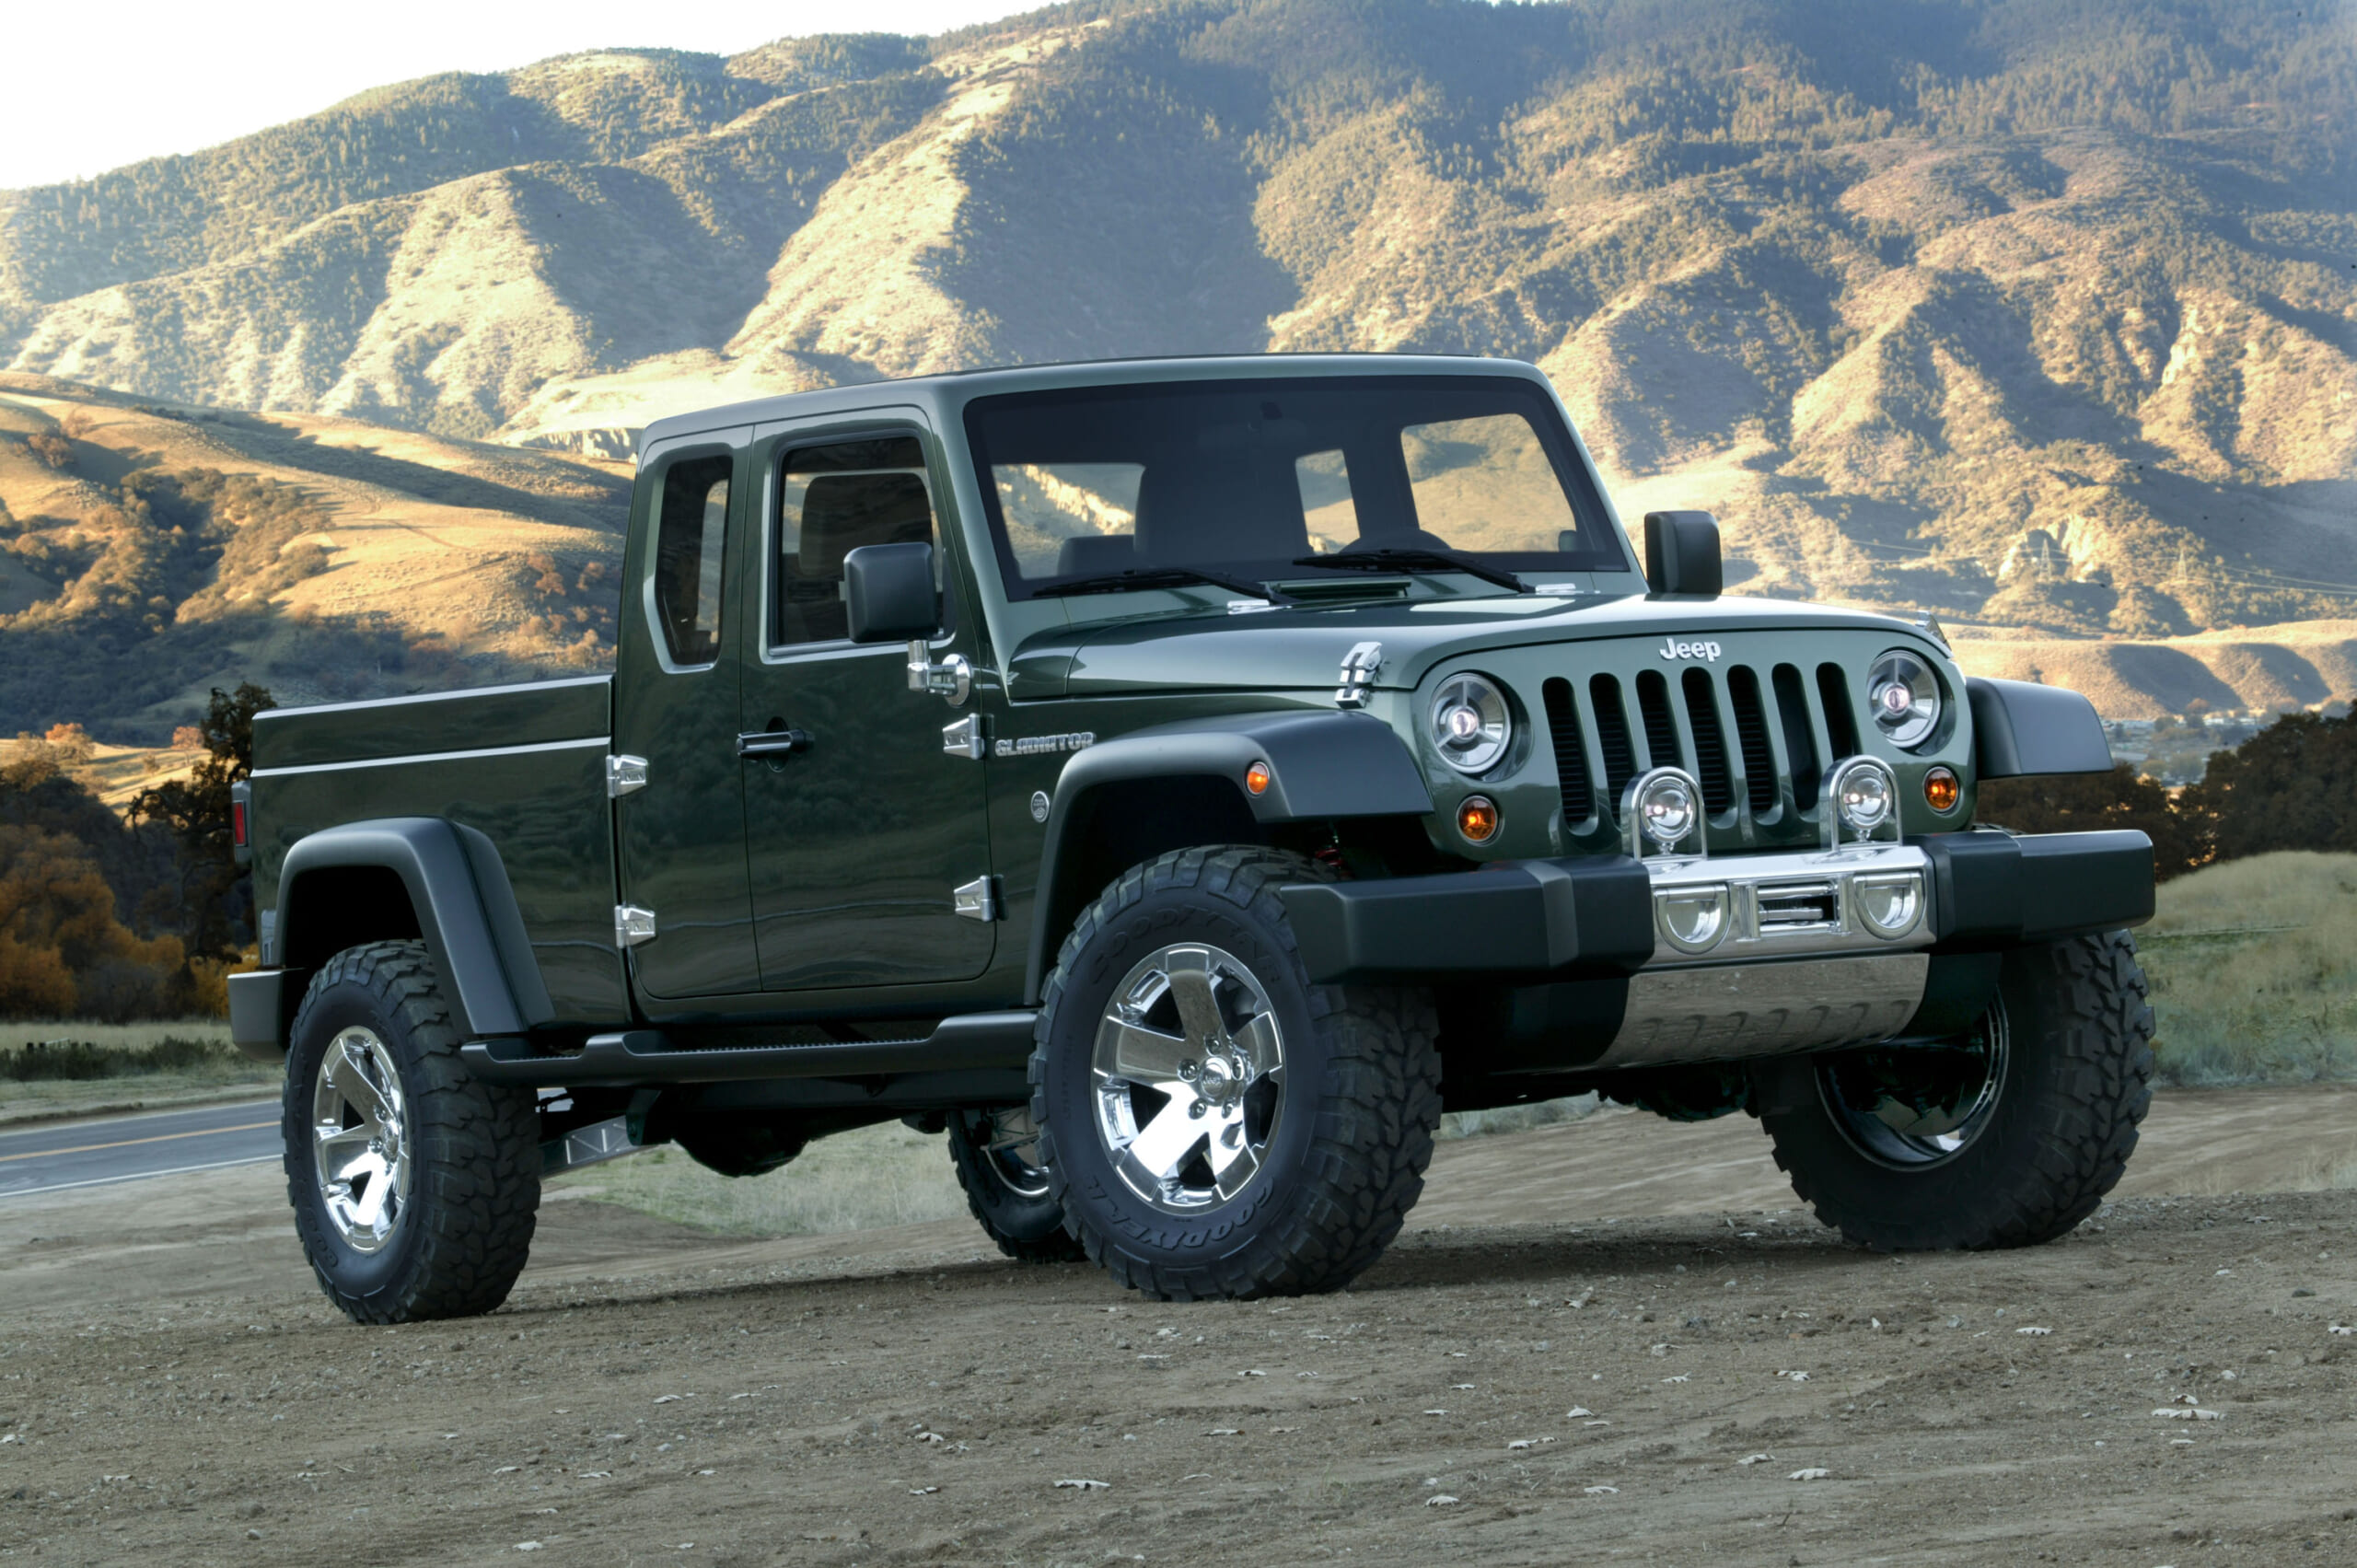 The Jeep Wrangler Pickup Truck Is Coming in 2018 - Maxim